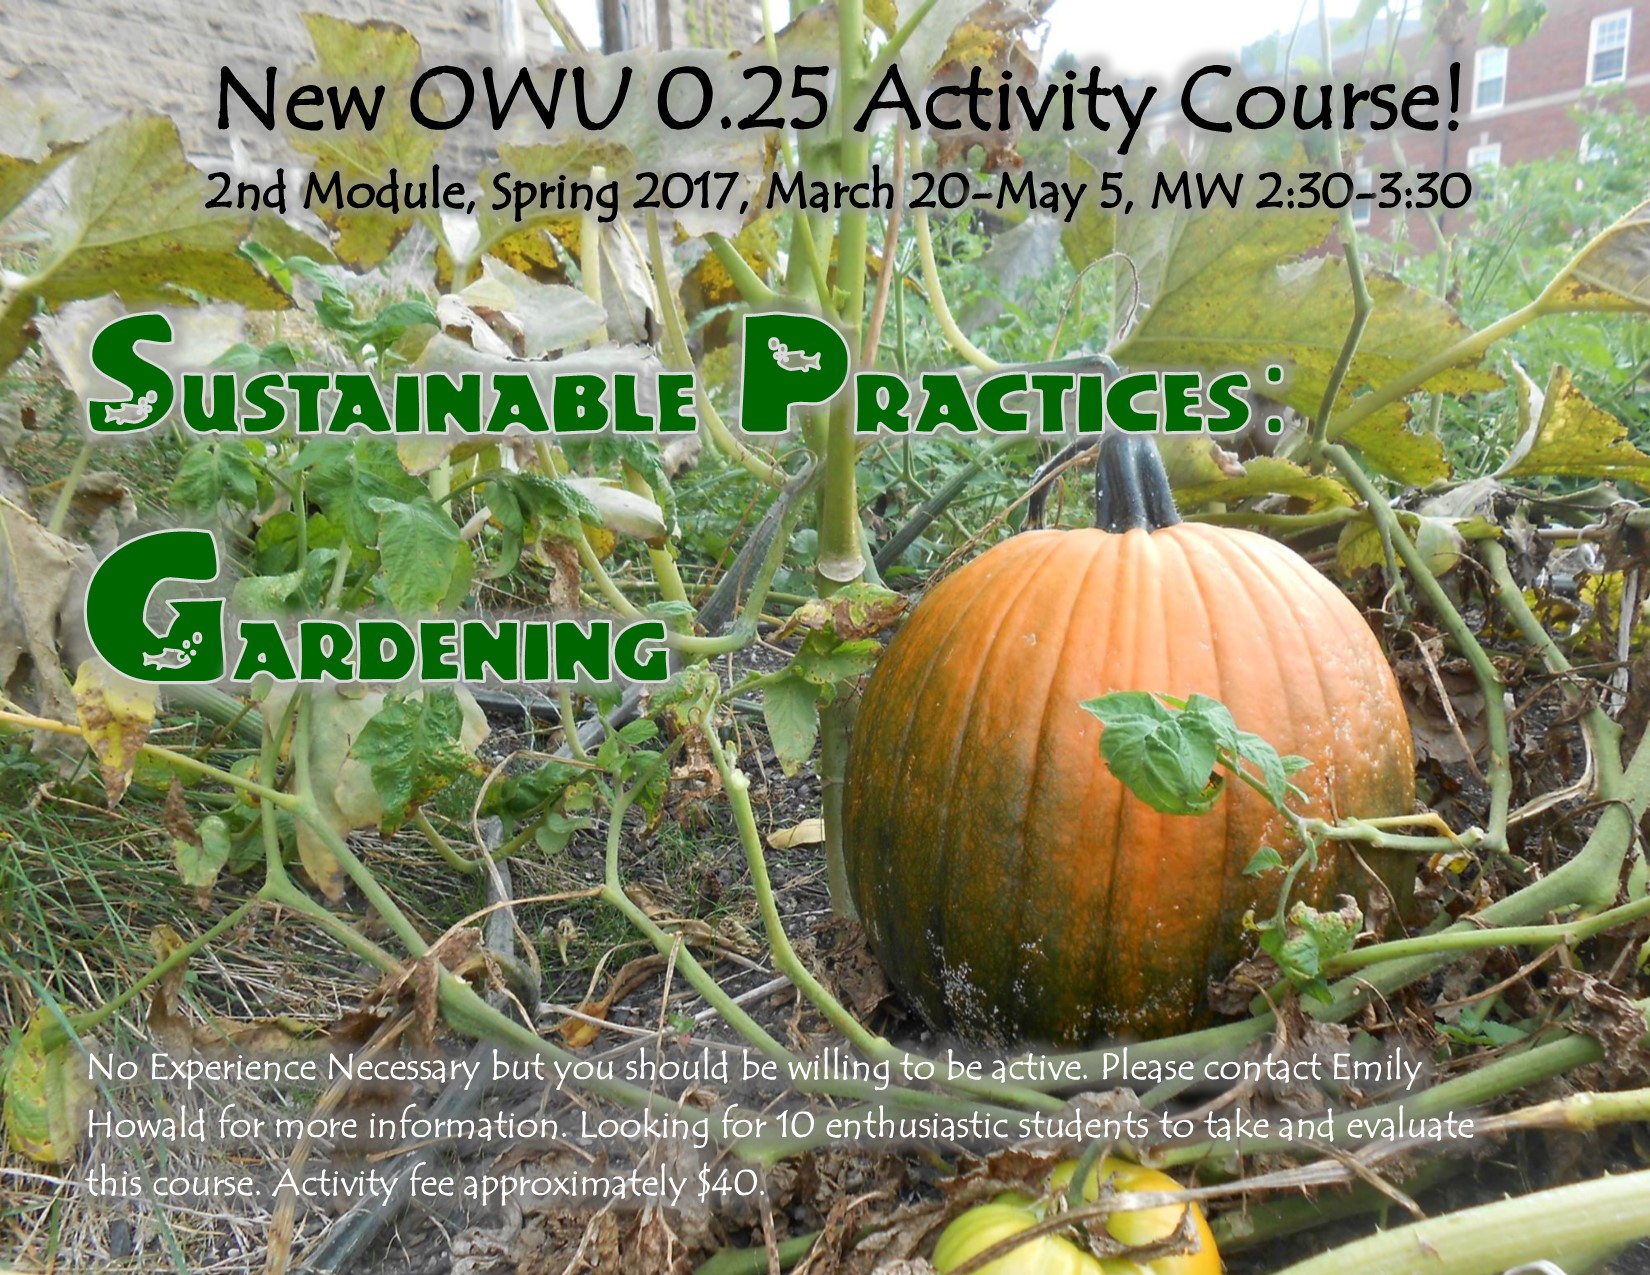 Sustainable Gardening: New OWU .25 Credit Activity Course 2nd Module Spring 2017